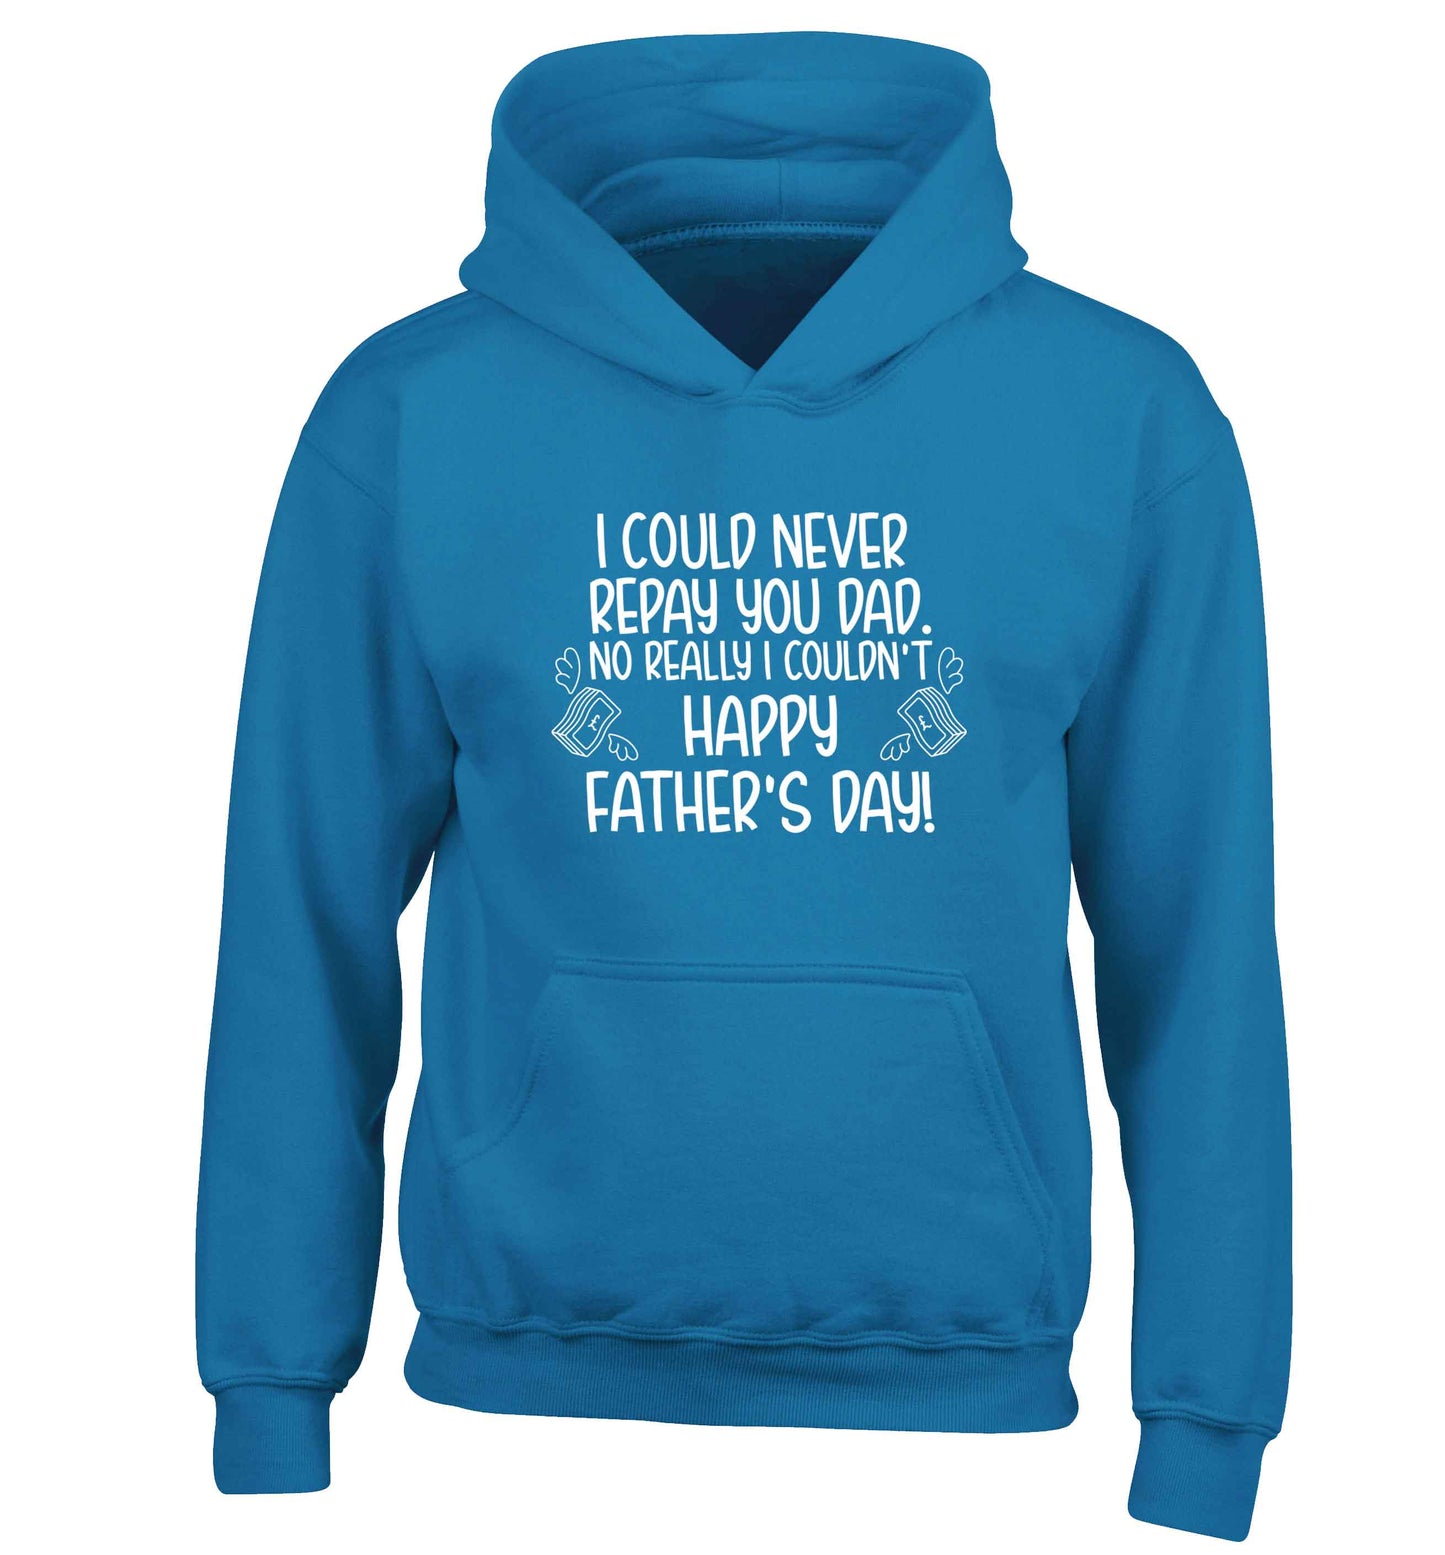 I could never repay you dad. No I really couldn't happy Father's day! children's blue hoodie 12-13 Years